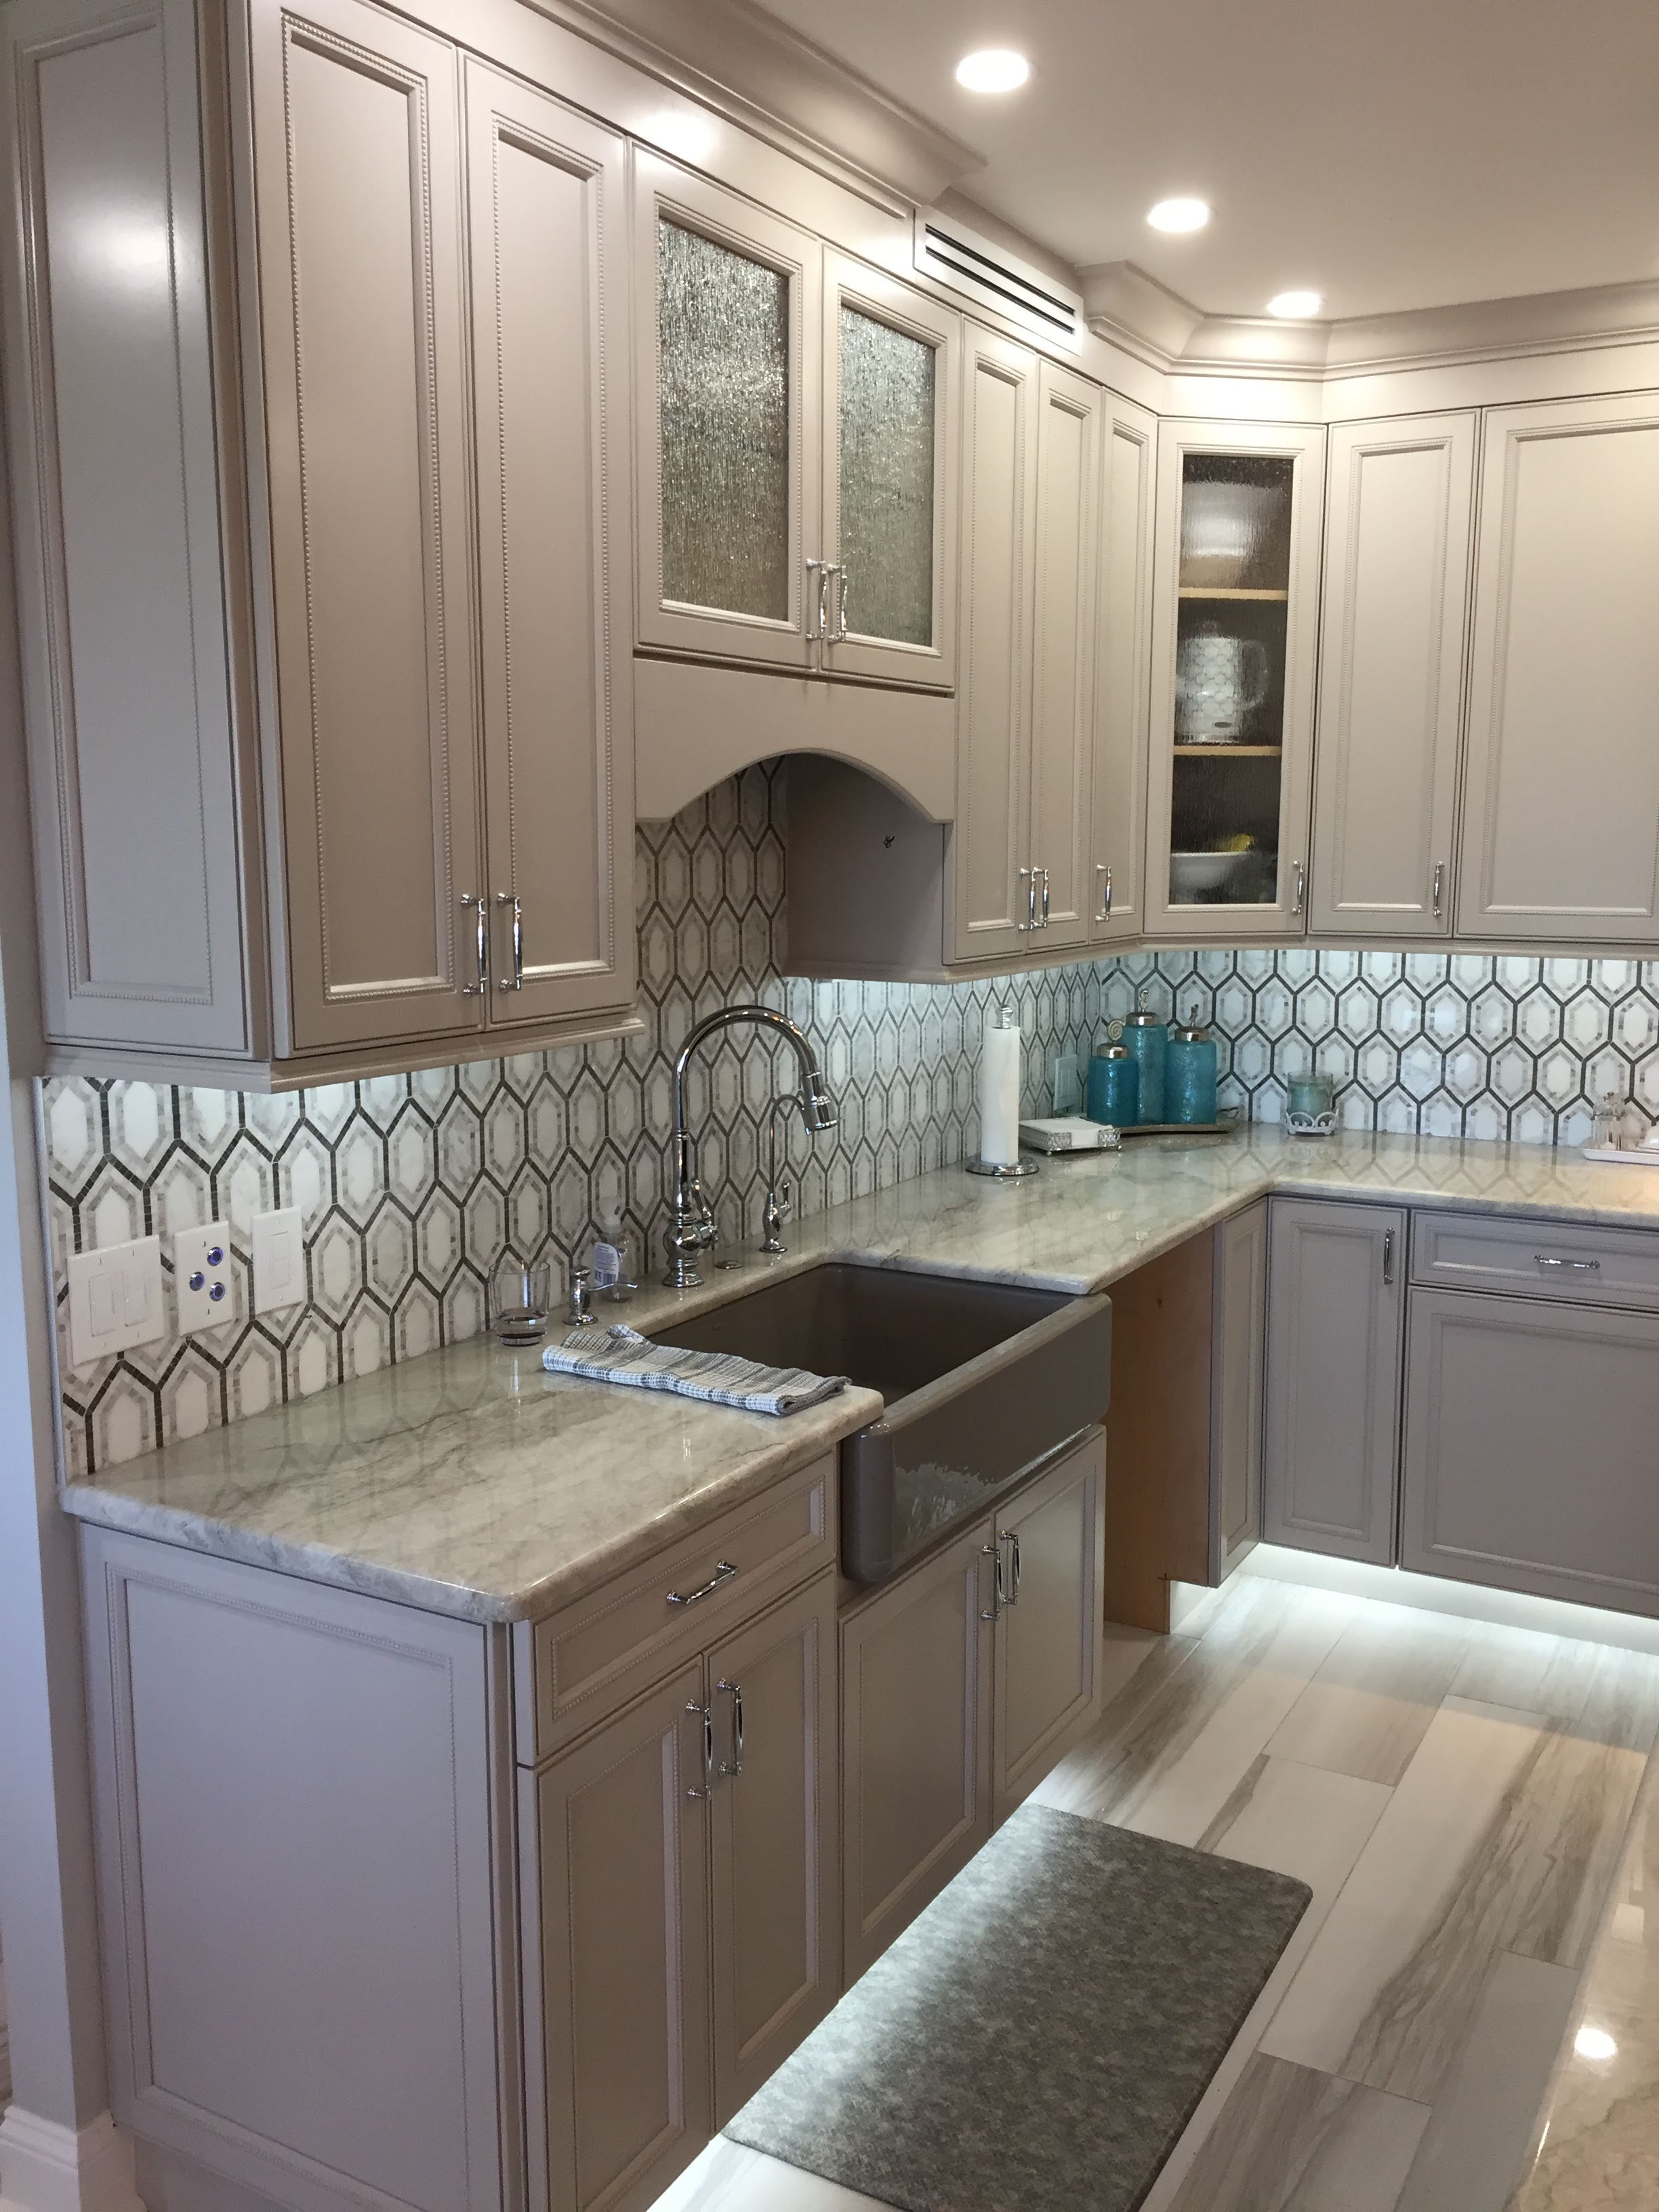 kitchen-cabinets-bourgoing-construction